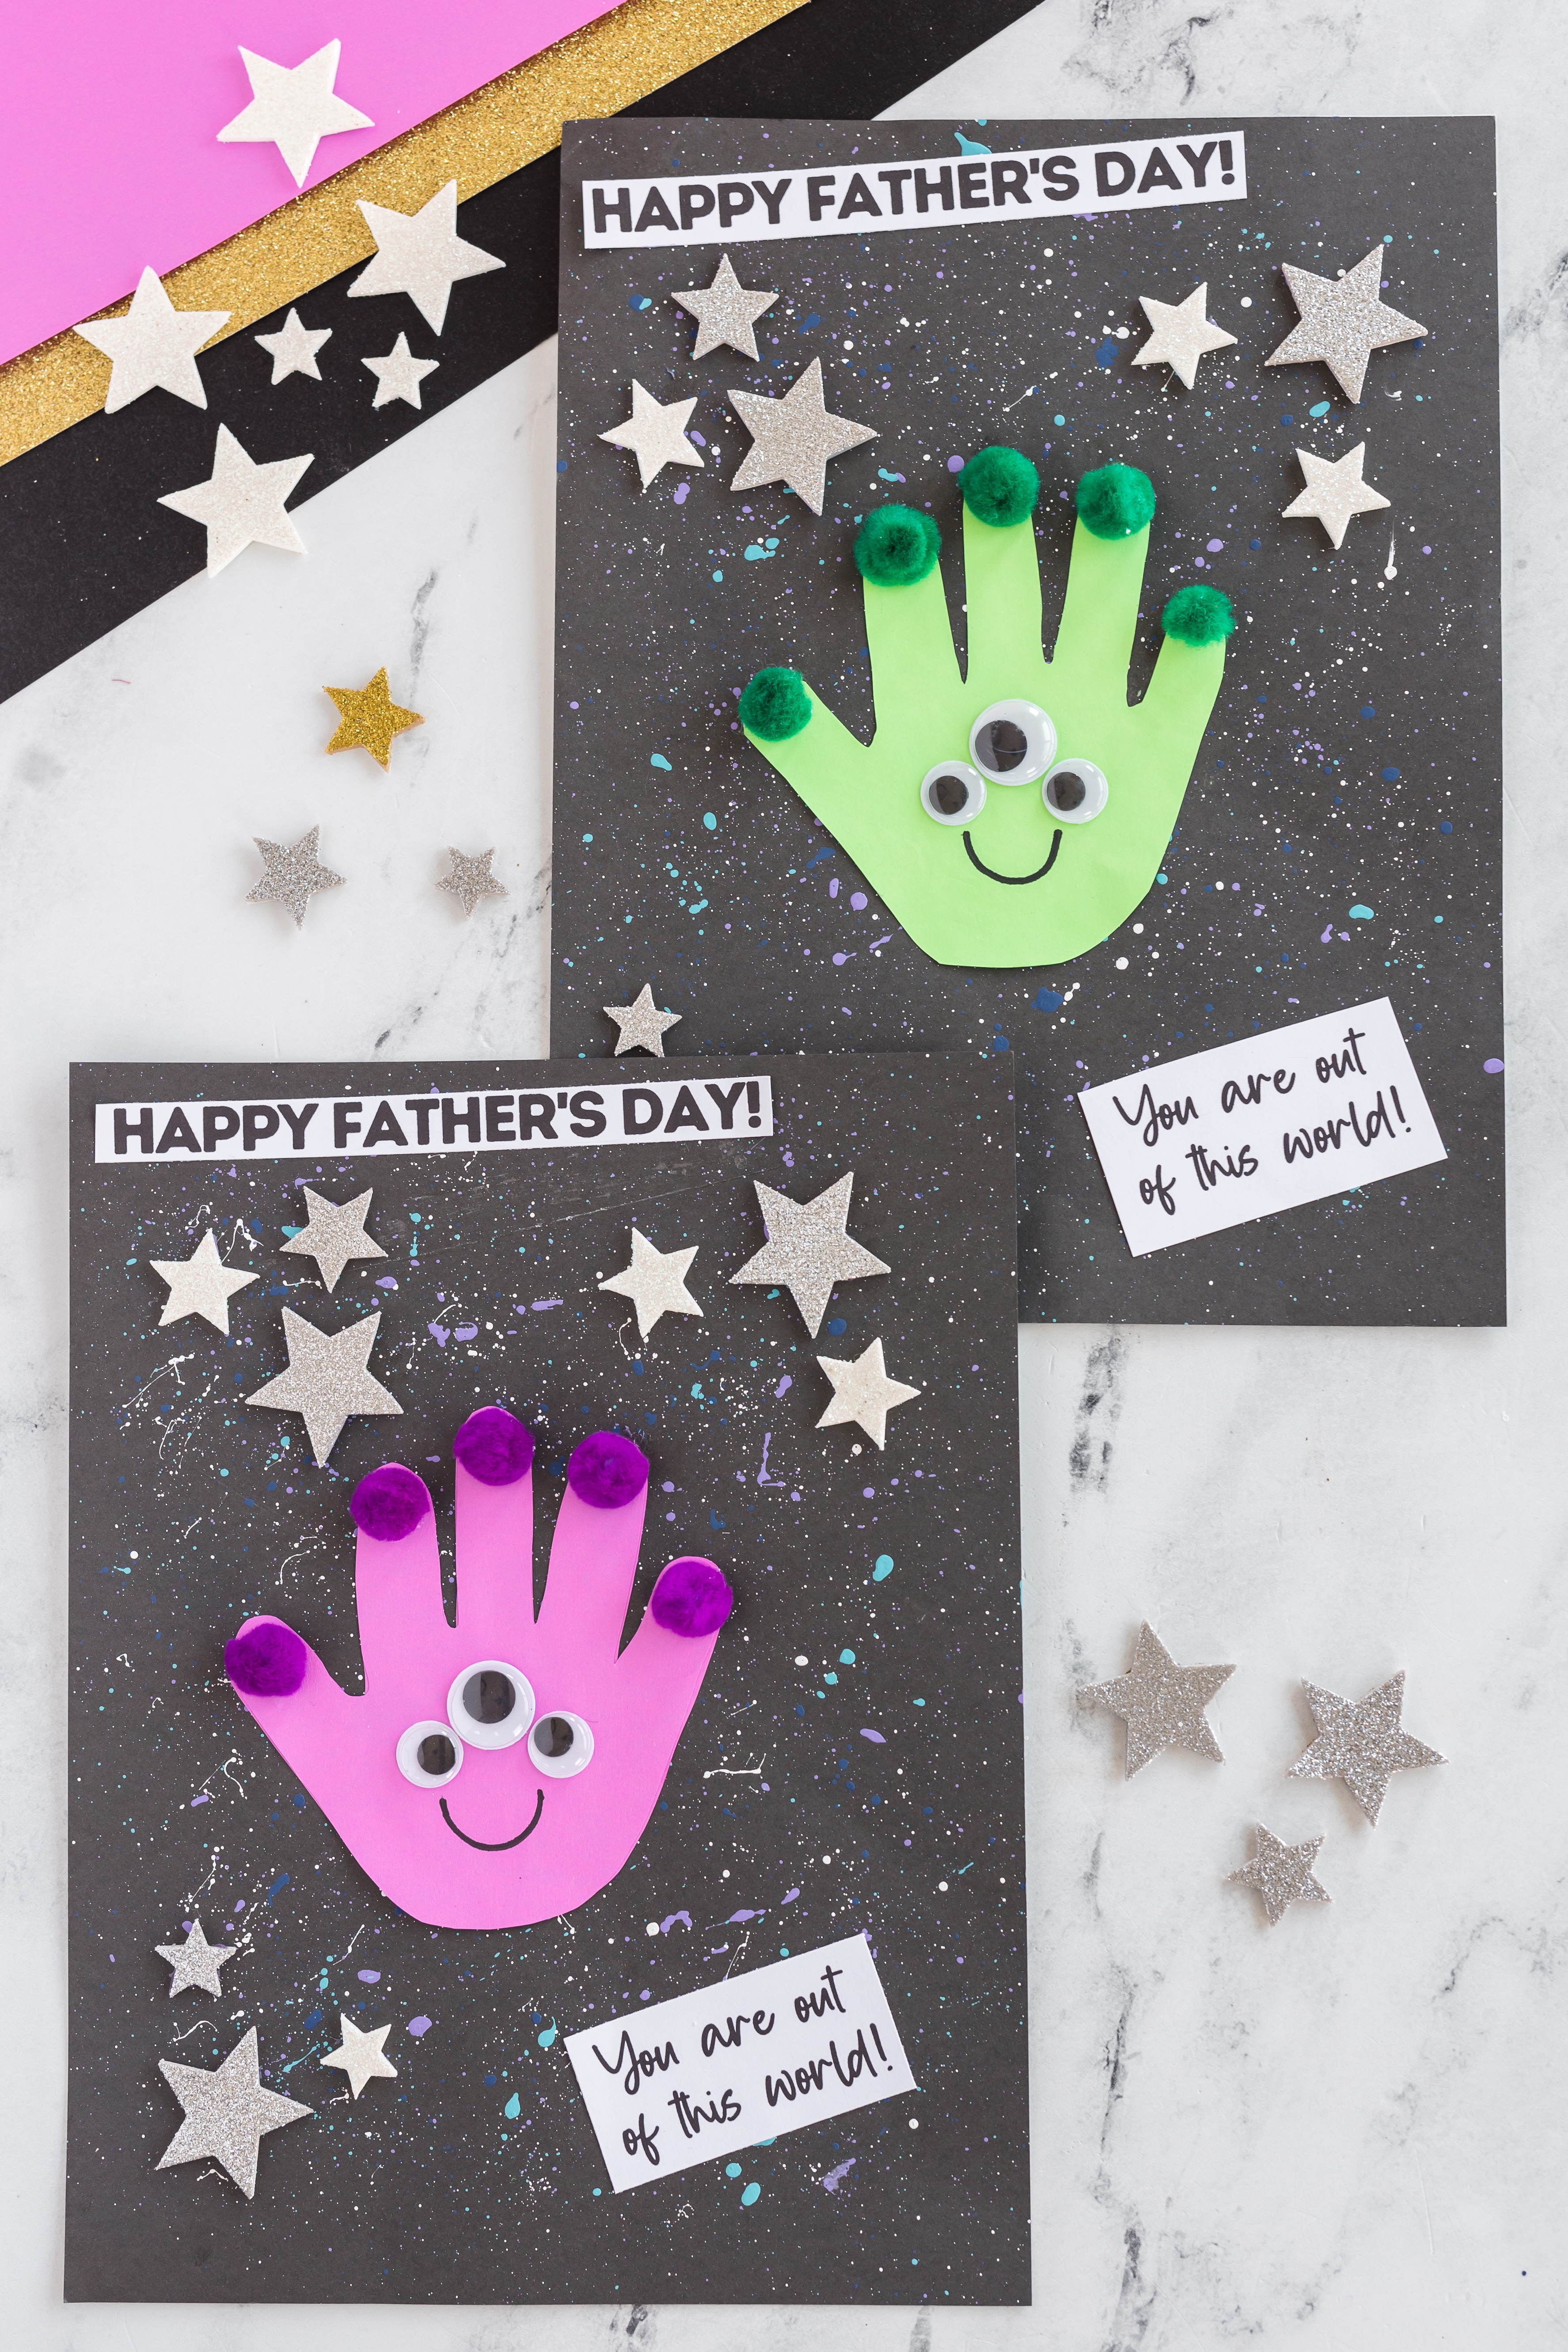 Make a fun handprint alien craft for Father's Day that is out of this world. Kids will go crazy over this galactic activity!